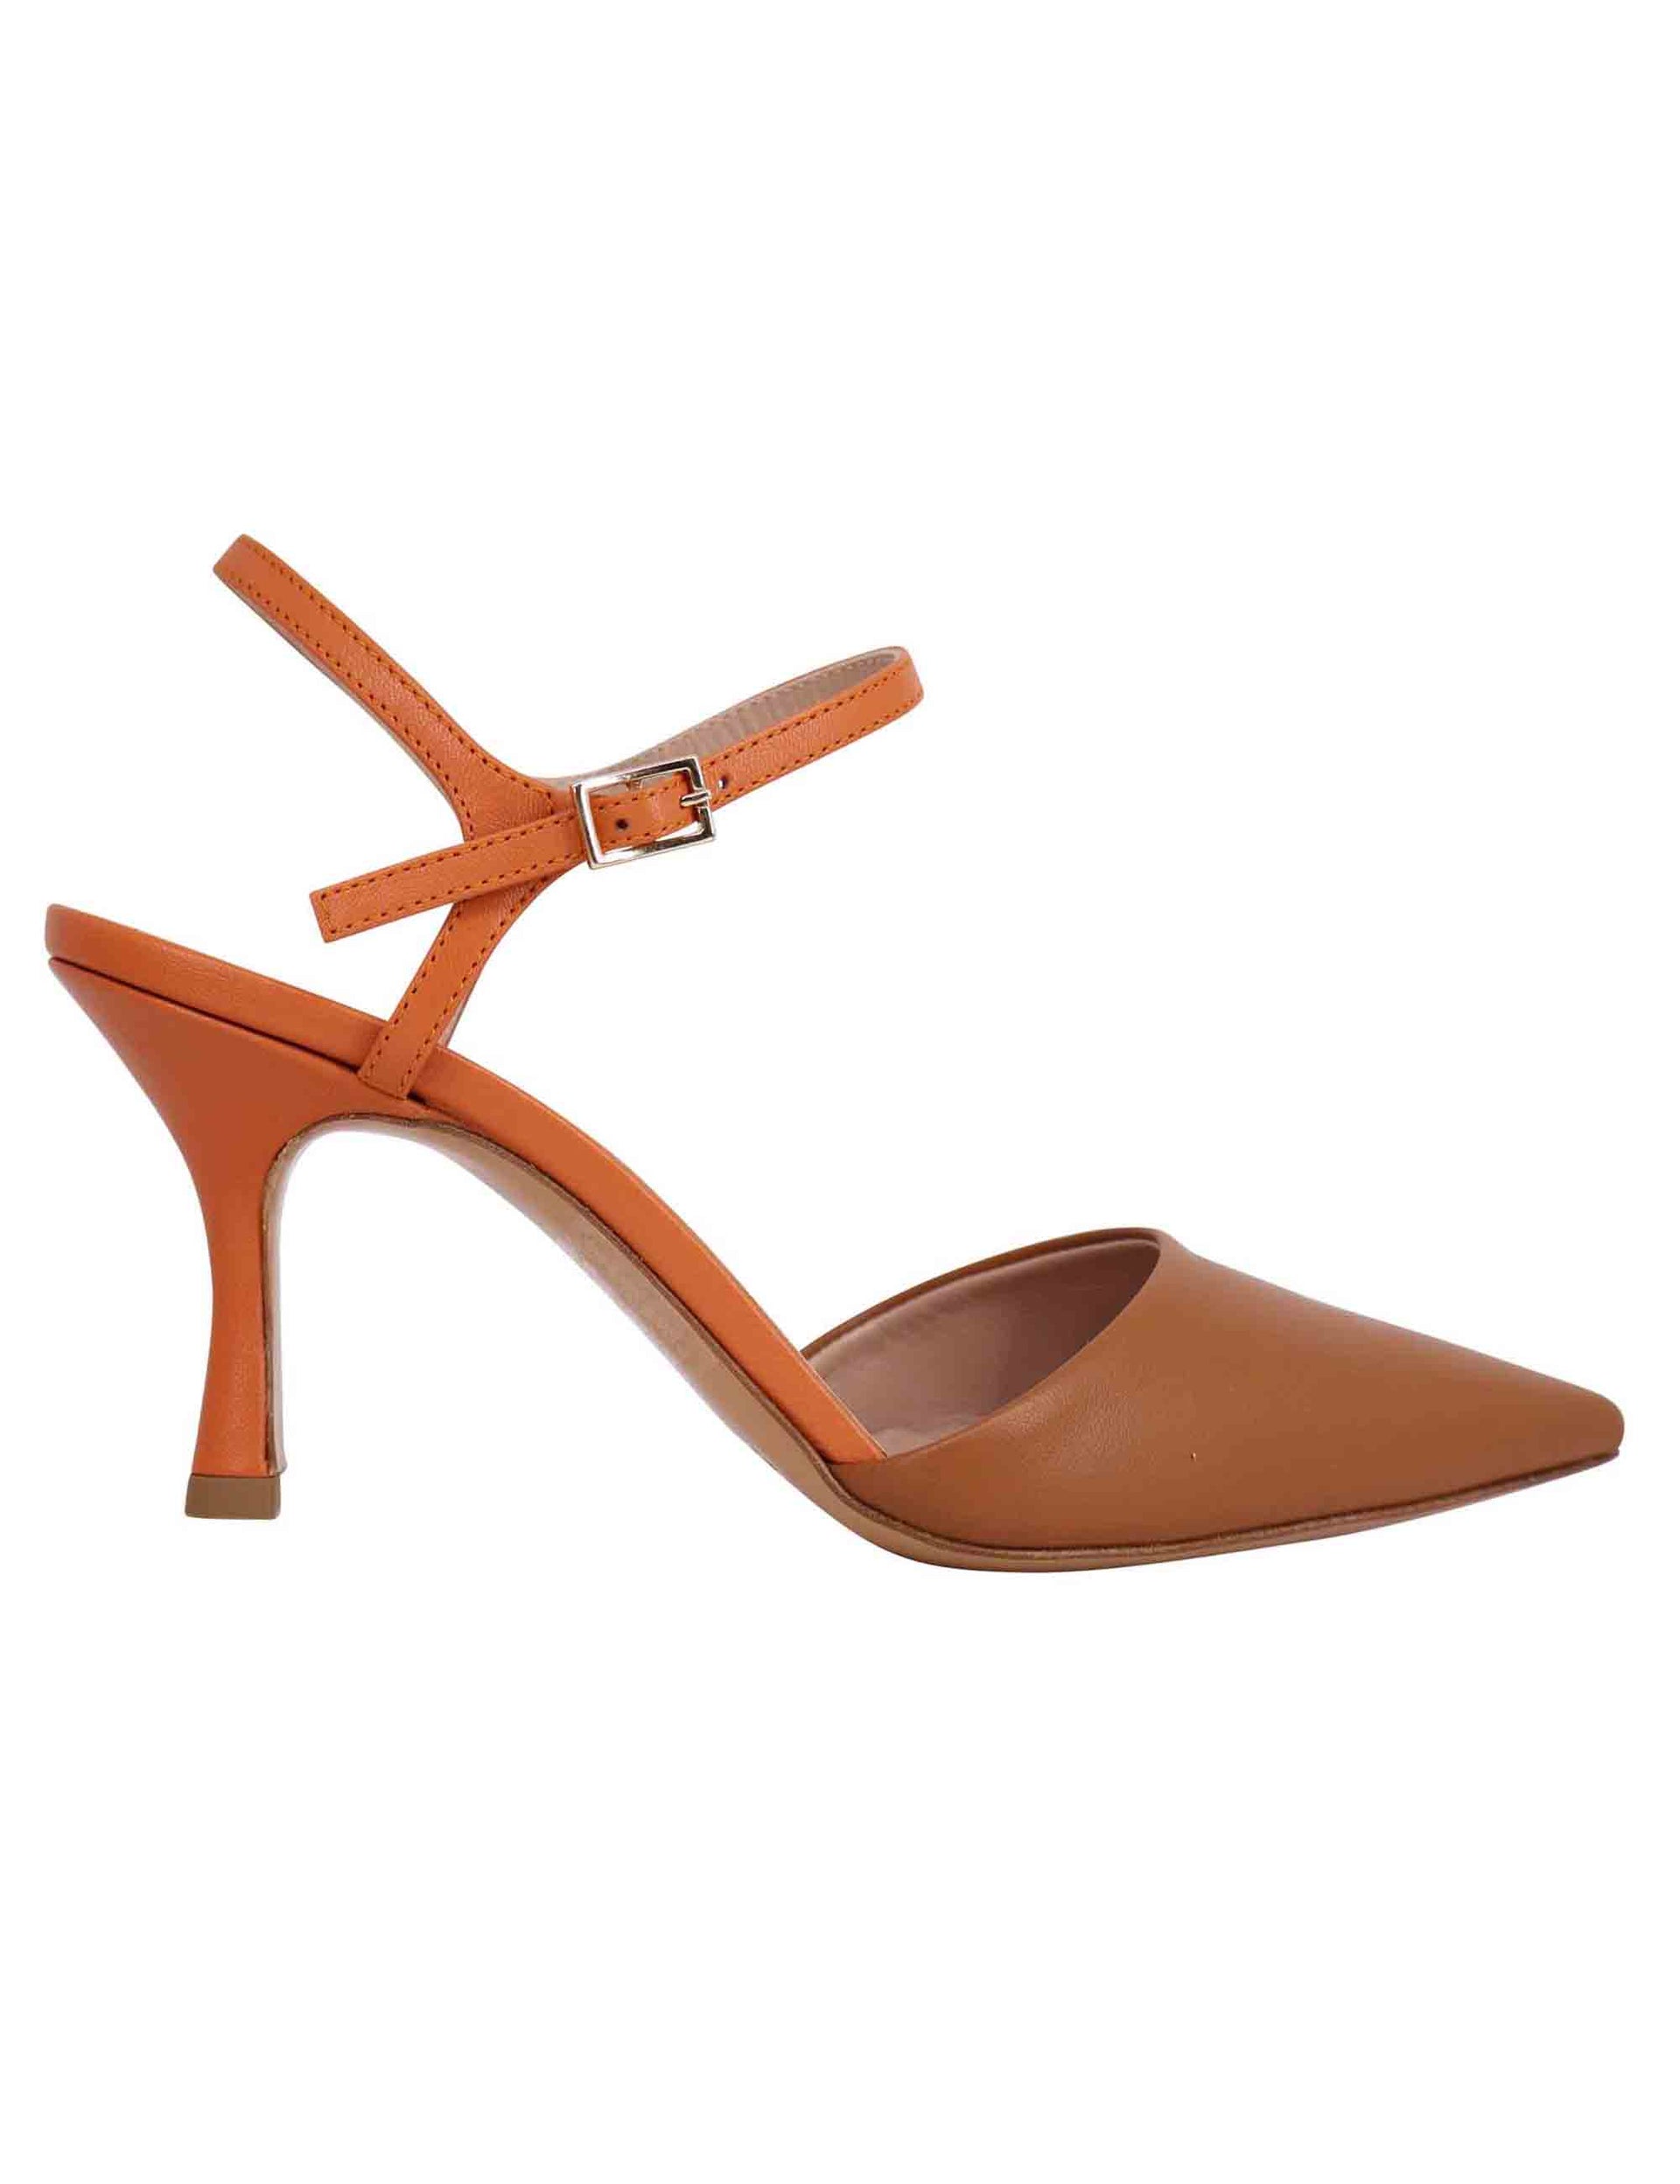 Women's sandals in tan leather with high heel and ankle strap